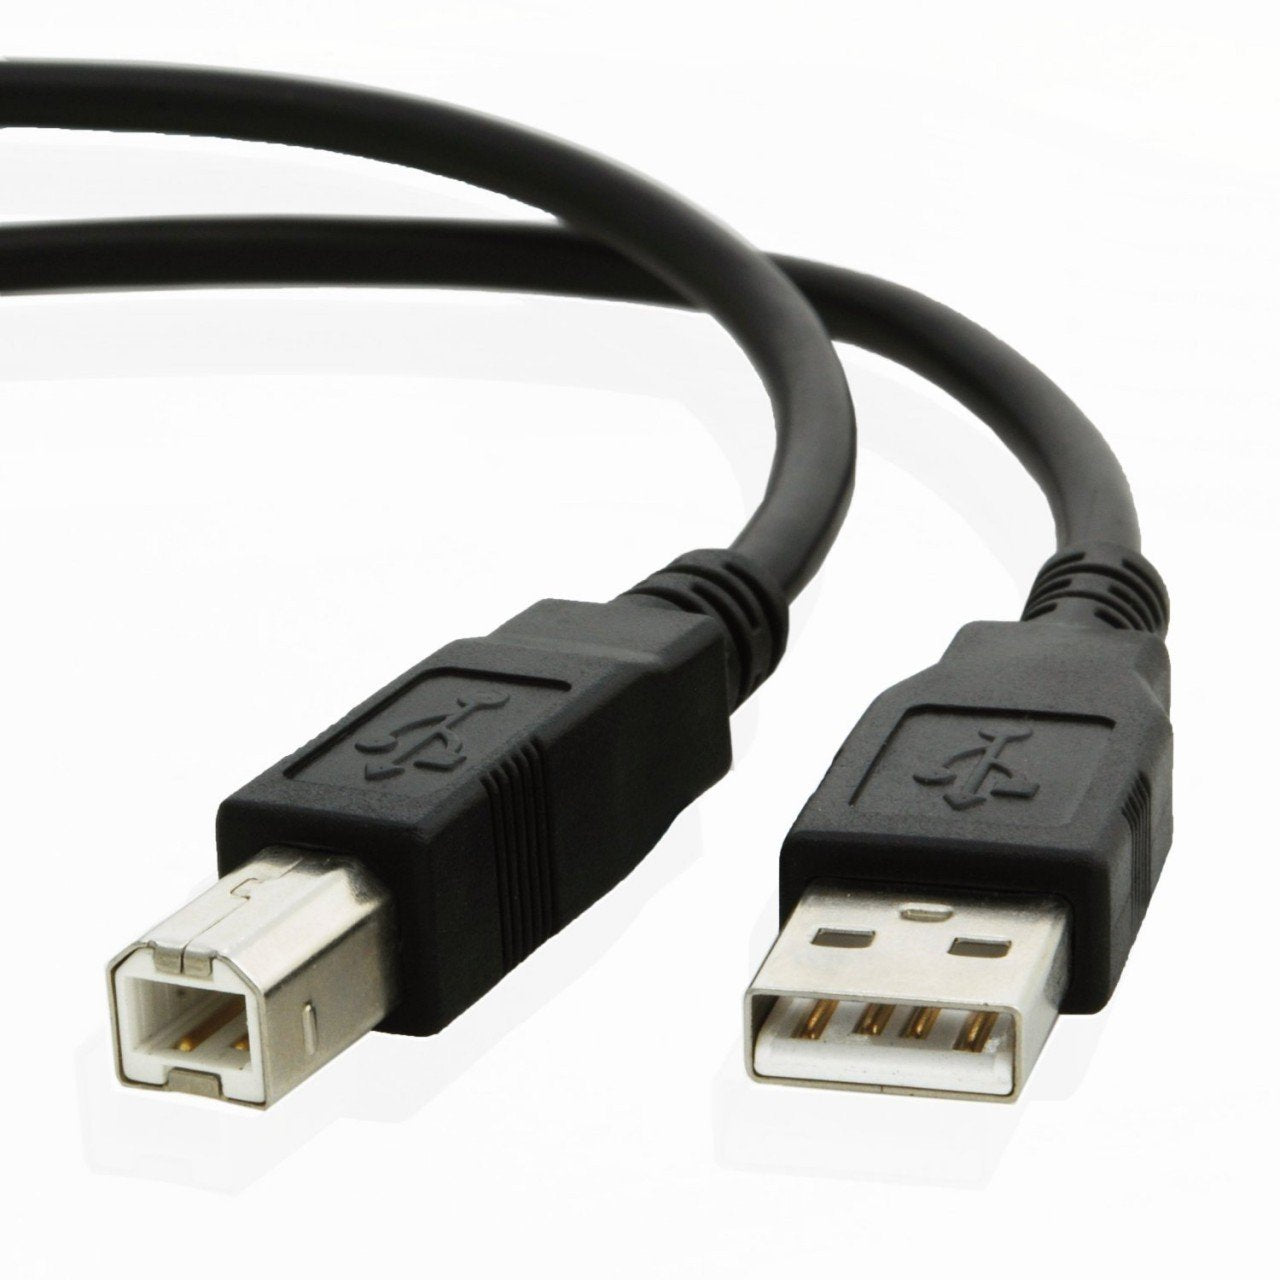 USB cable for Brother INTELLIFAX 2940